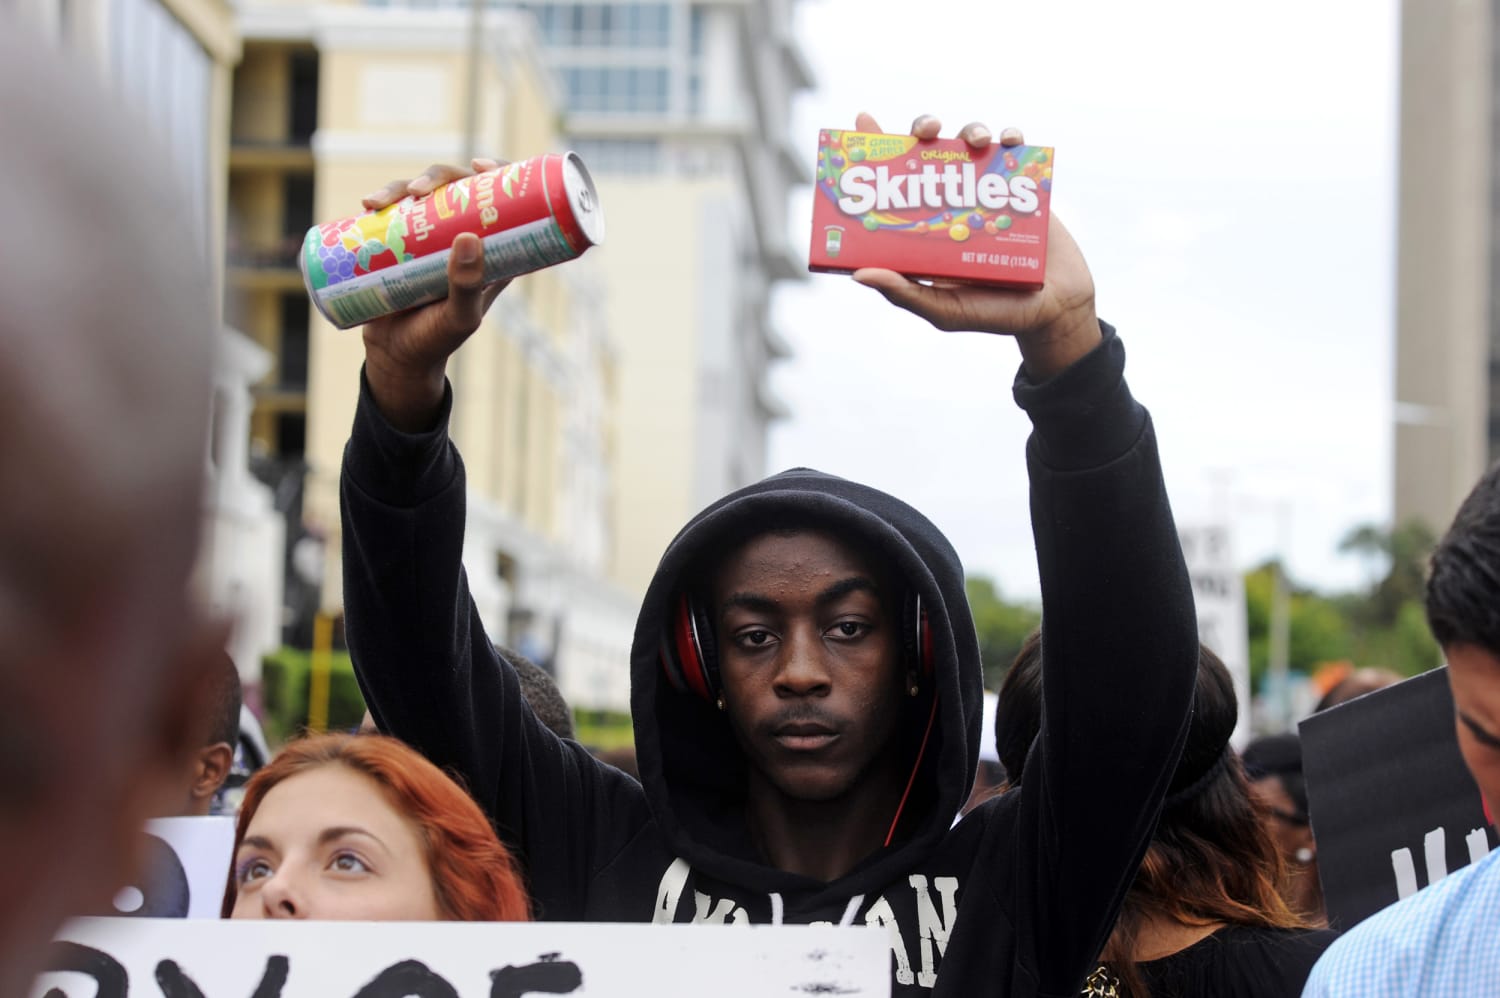 Analysis: Trayvon Martin's Death Still Fuels a Movement Five Years Later